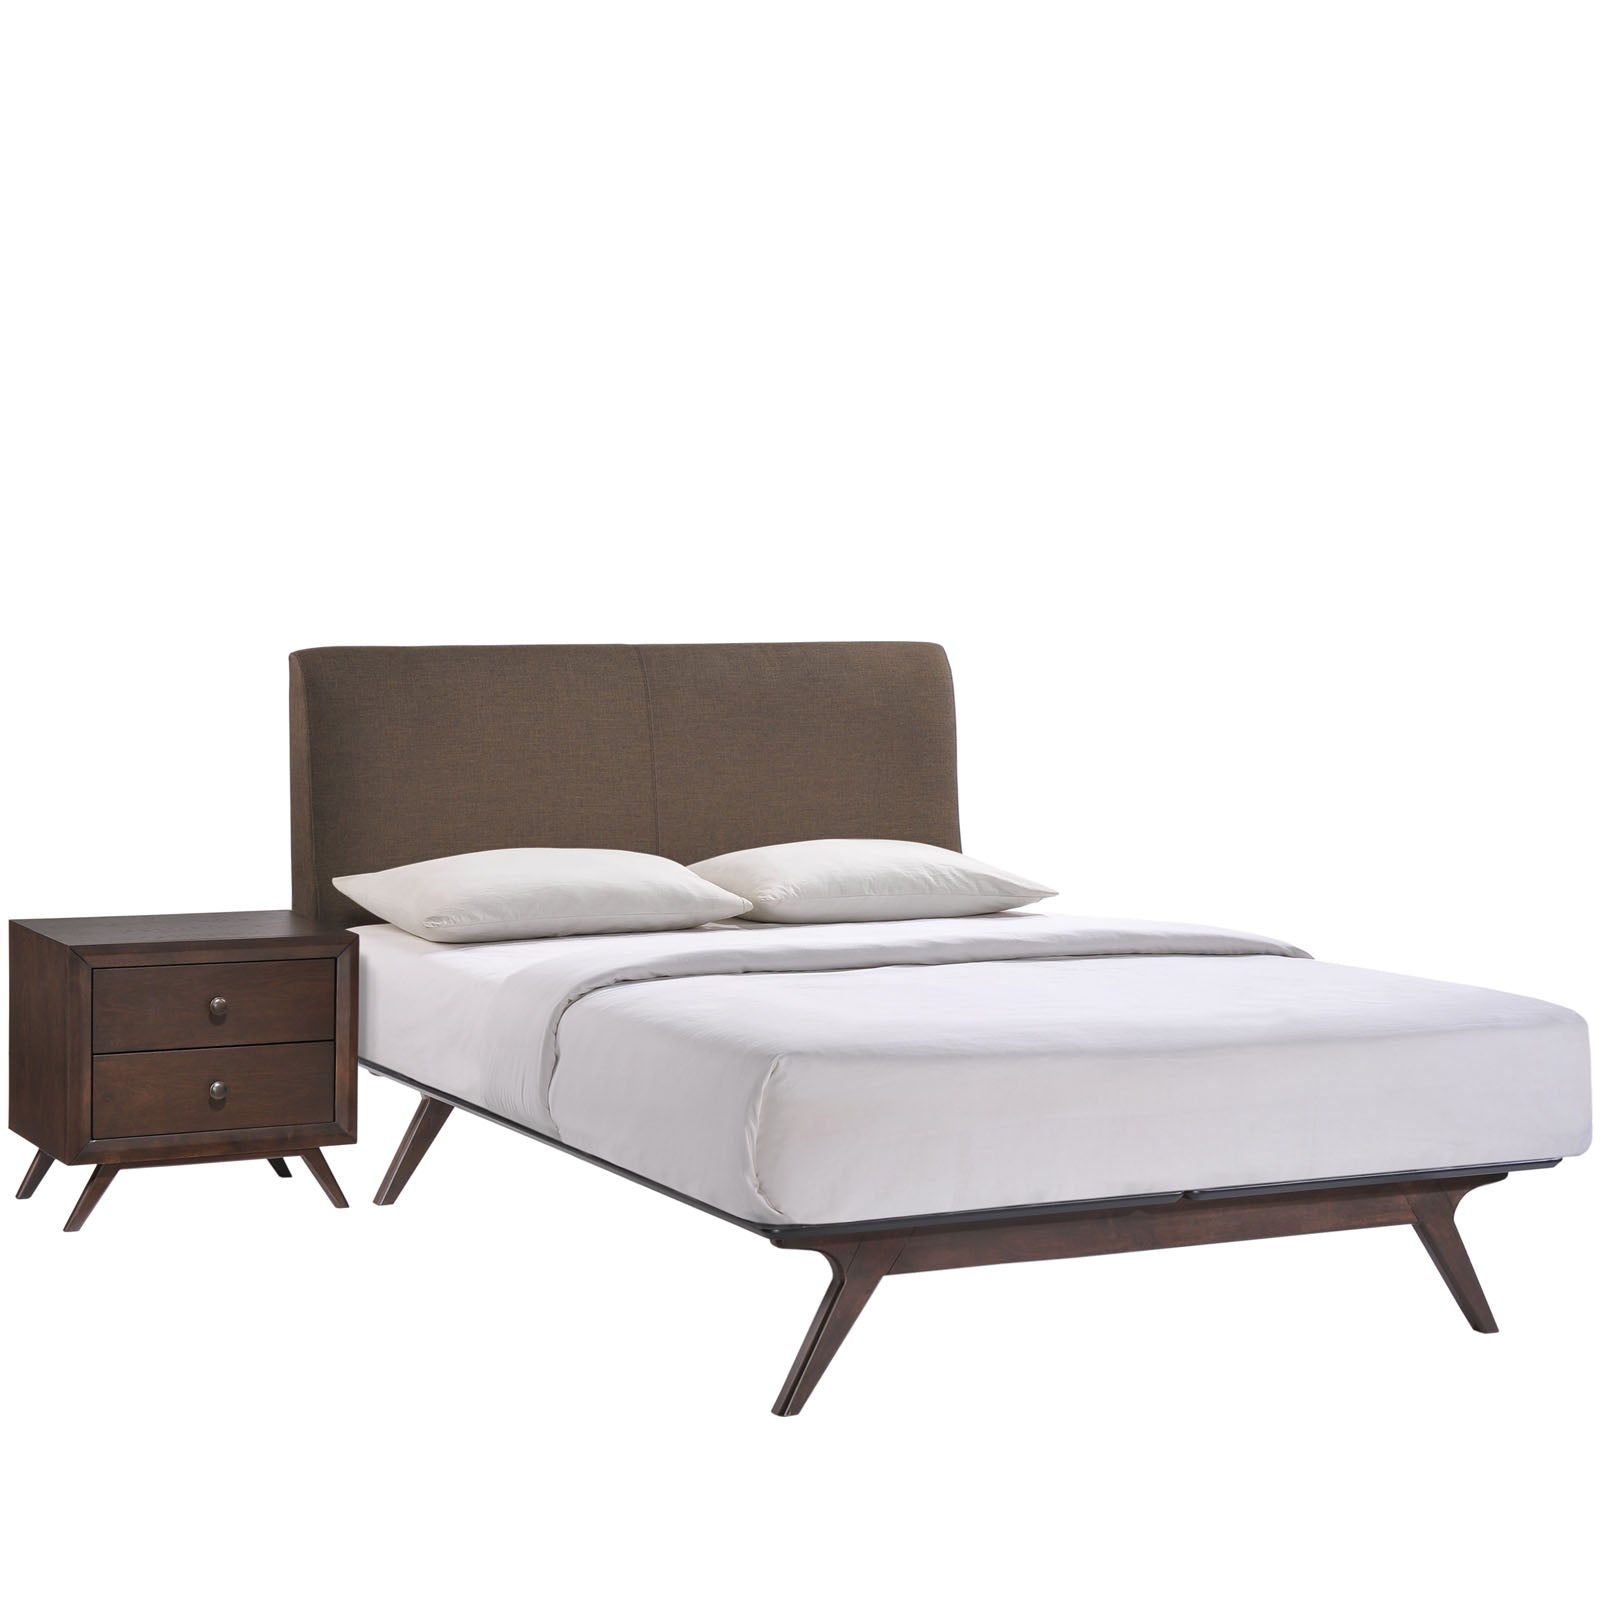 Tracy 2 Piece Queen Bedroom Set - East Shore Modern Home Furnishings